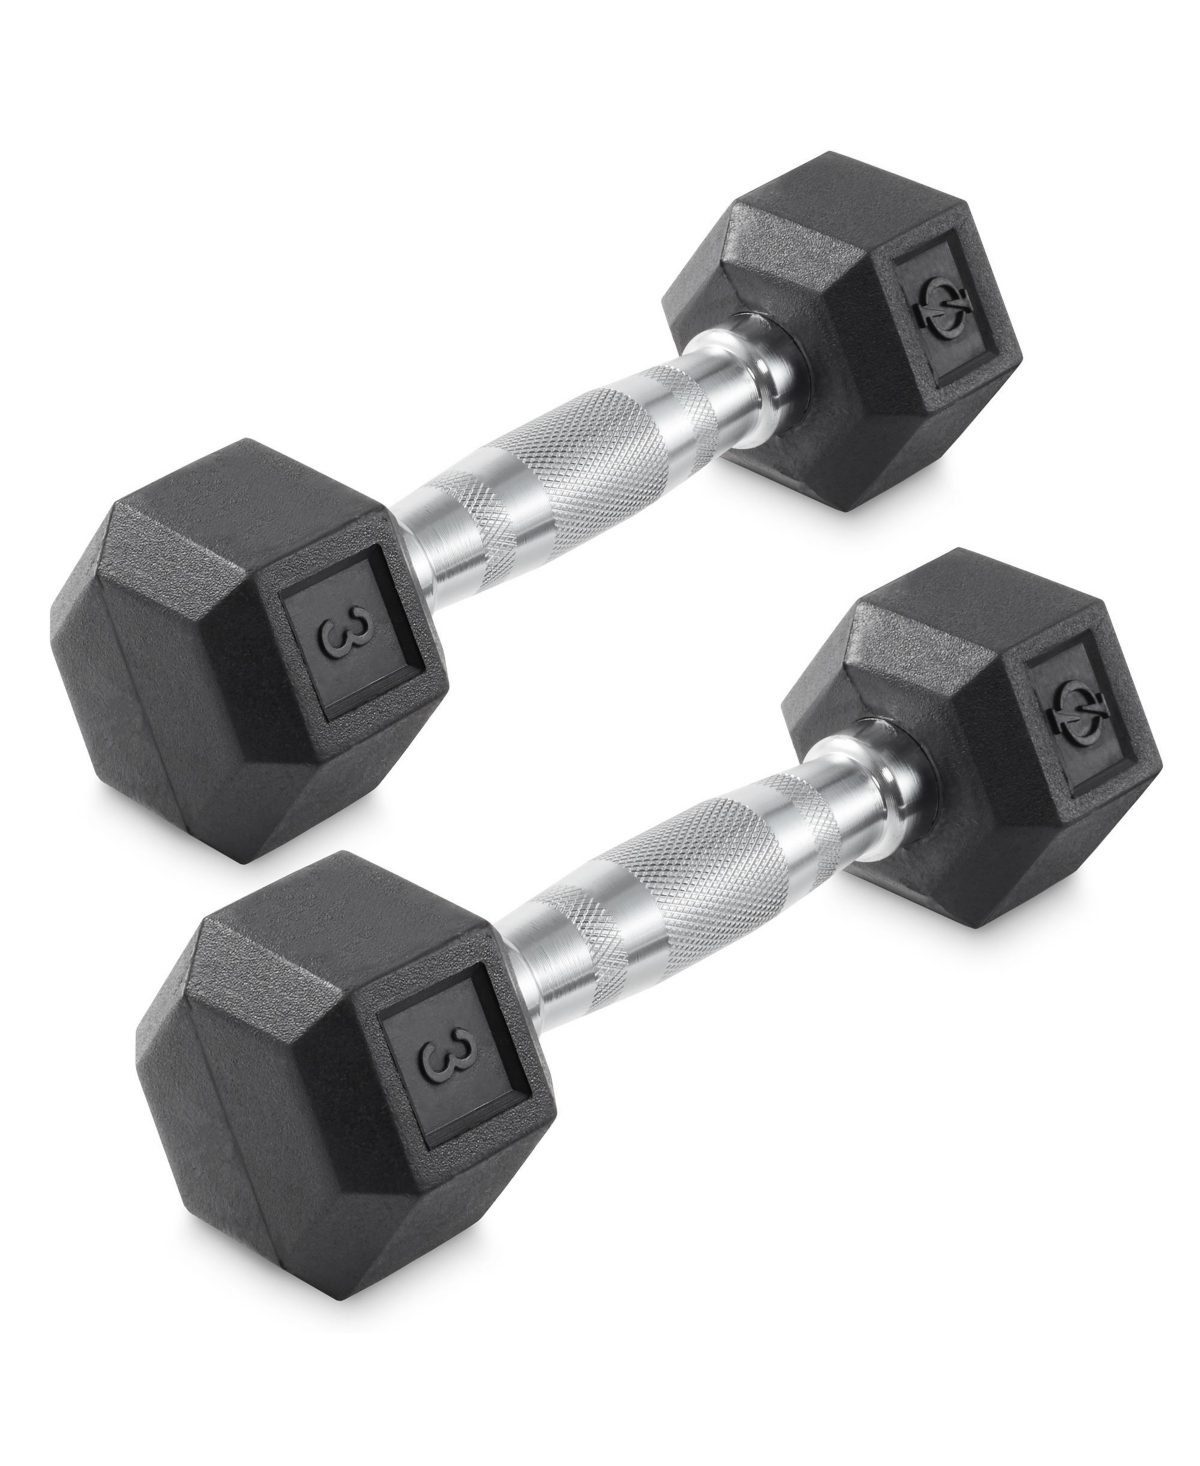 Rubber Coated Hex Dumbbell Hand Weights, 3 lb Pair - Black